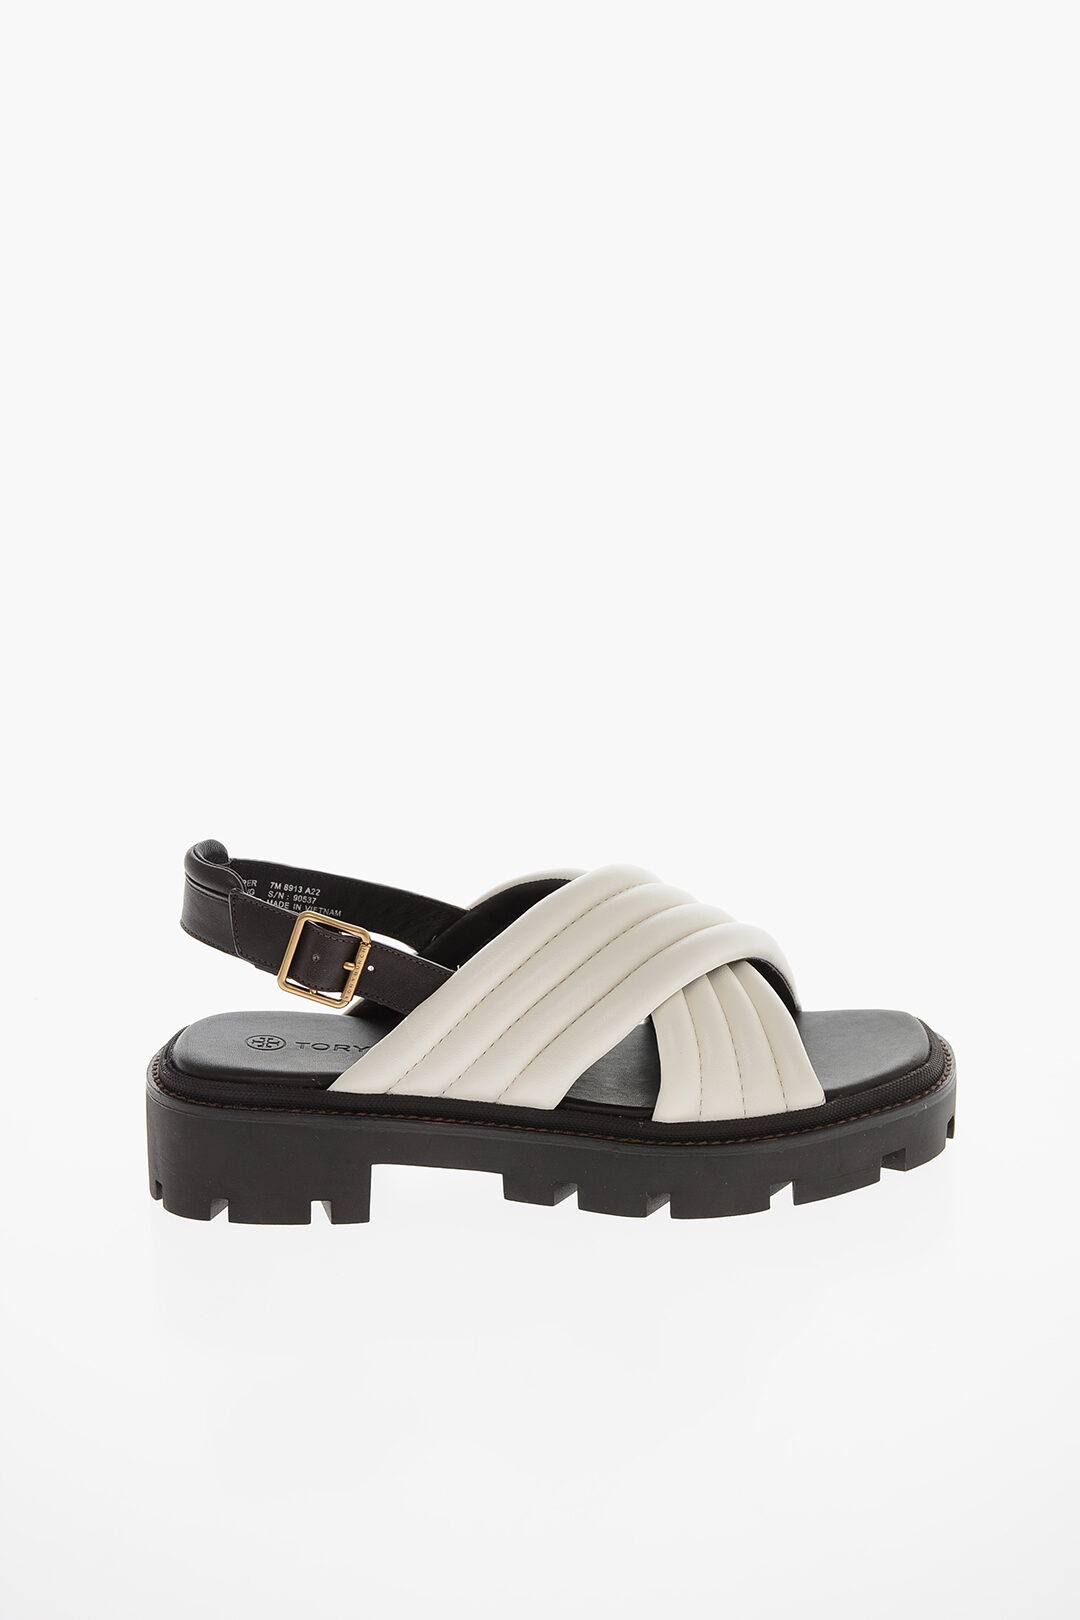 Tory Burch Padded Leather Sandals with Lug Sole women - Glamood Outlet